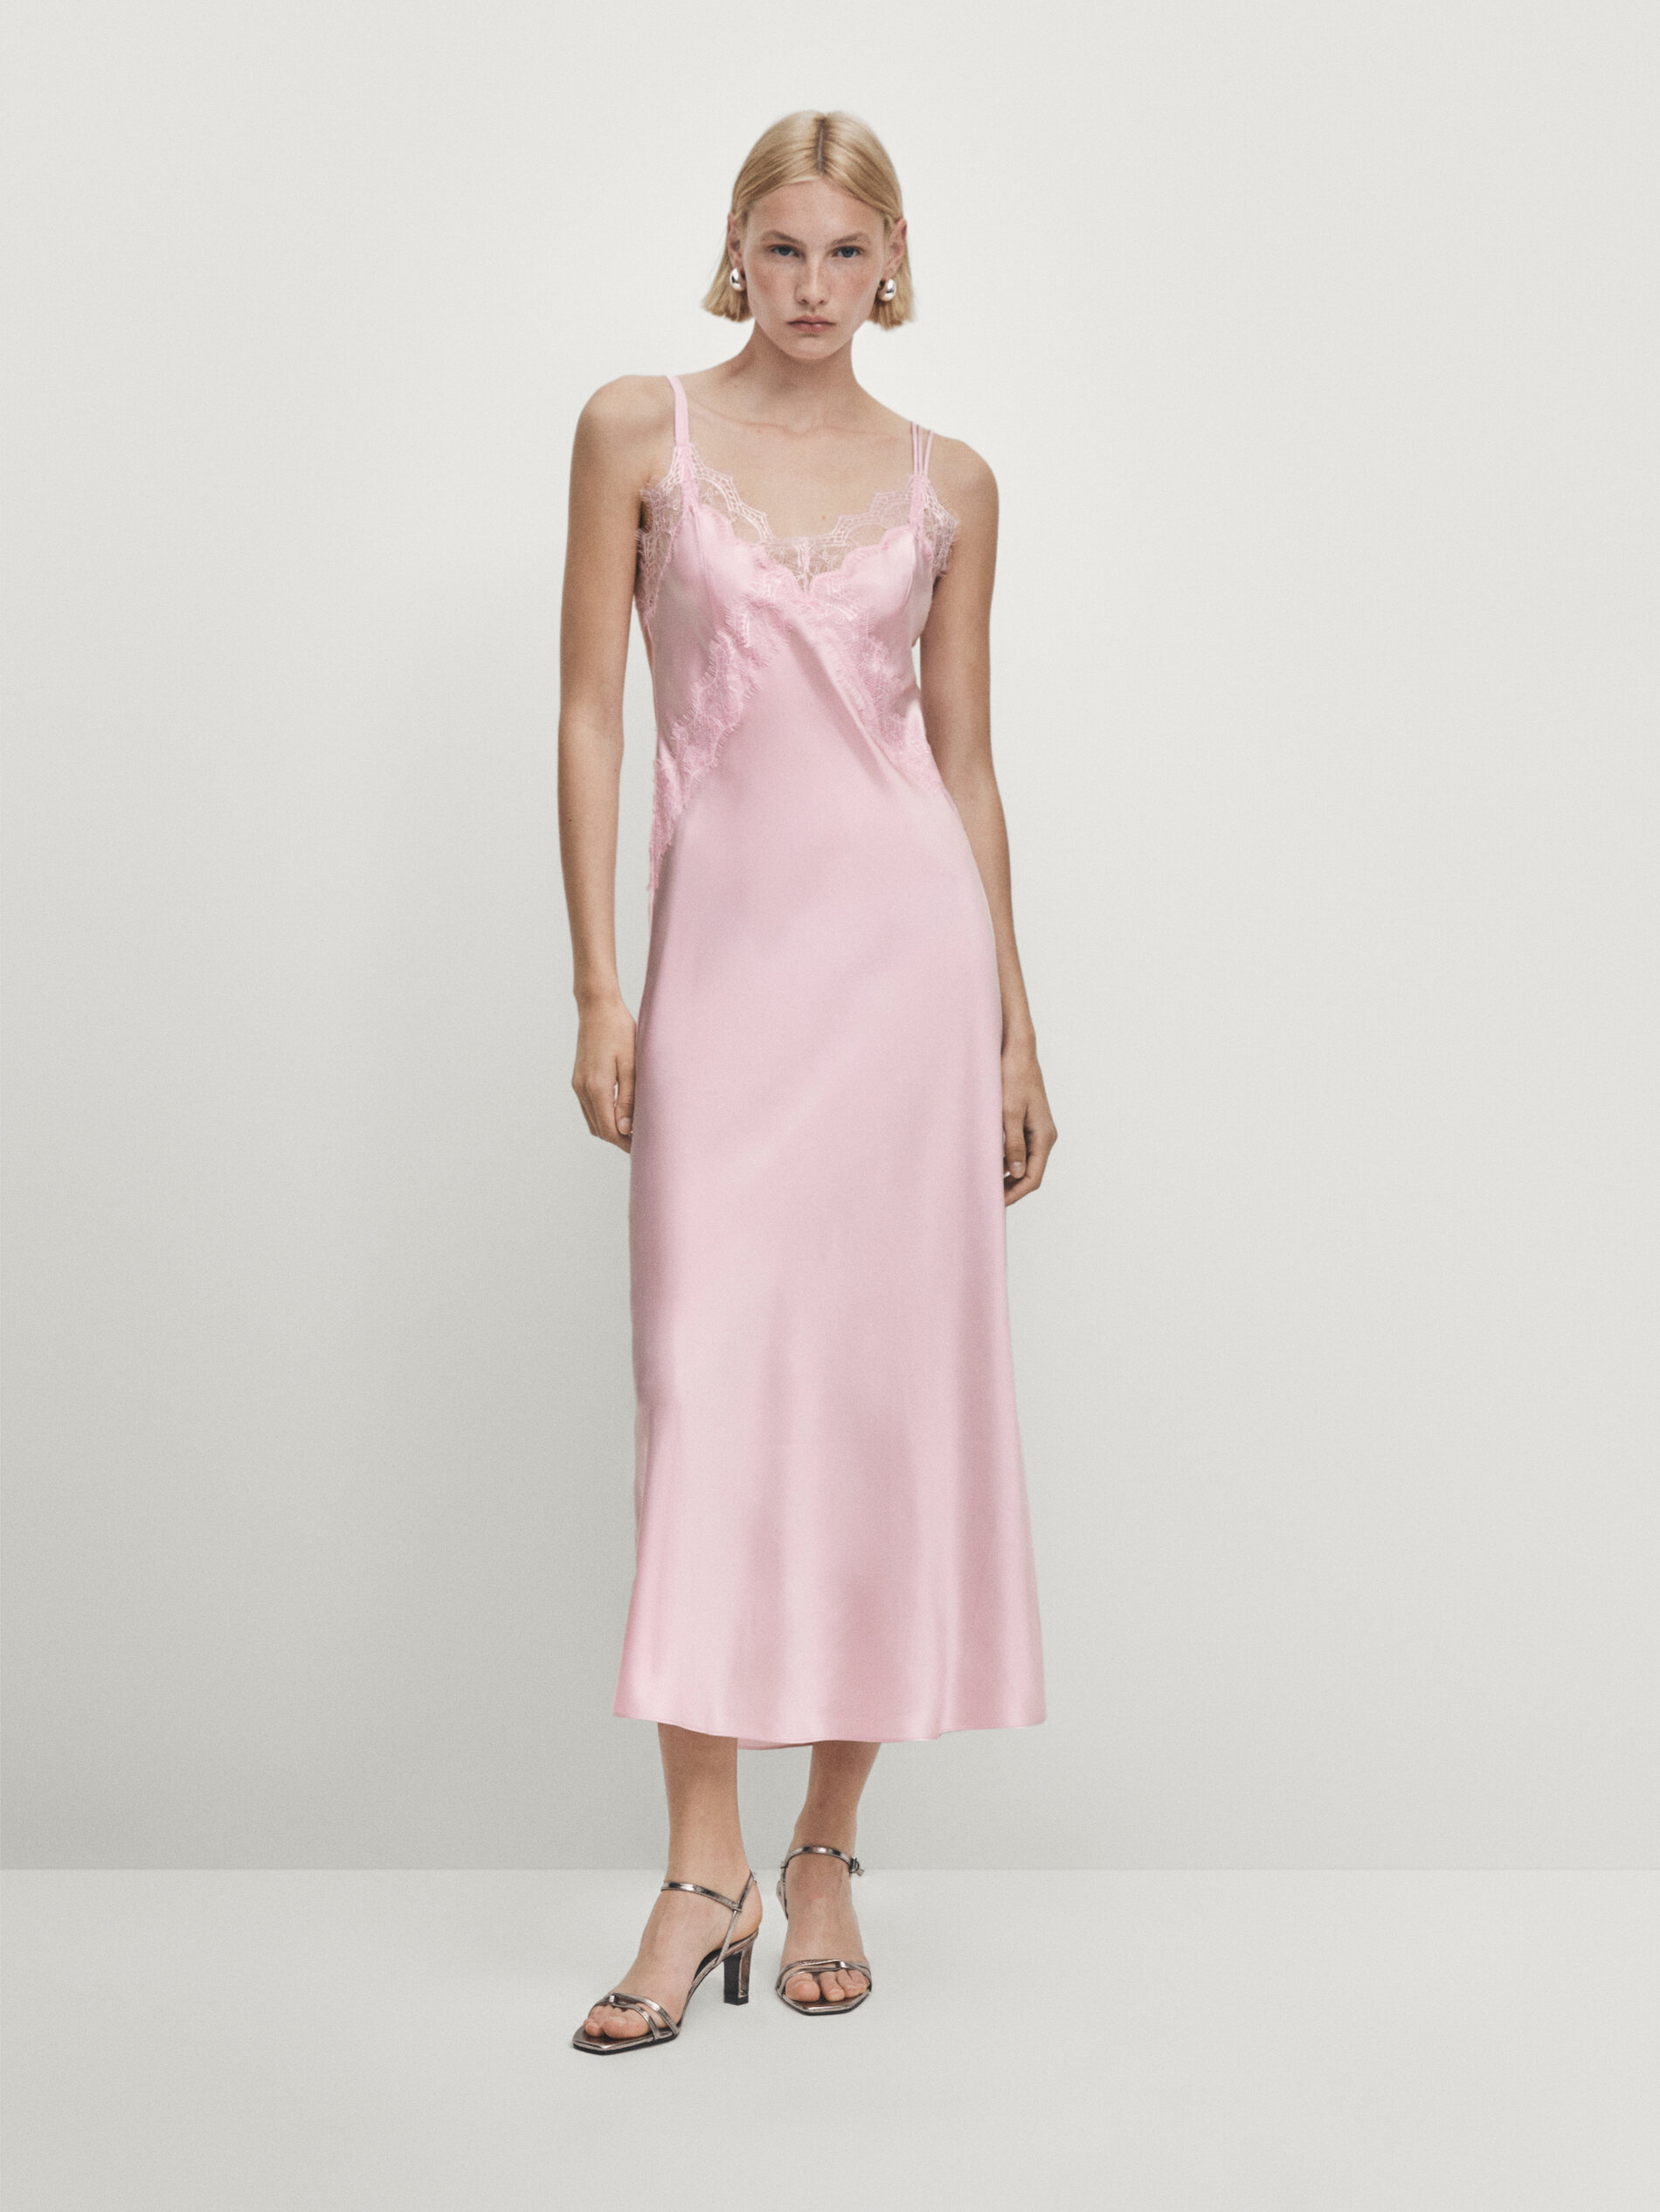 Satin camisole dress with lace detail - Studio · Rose Pink · Smart 